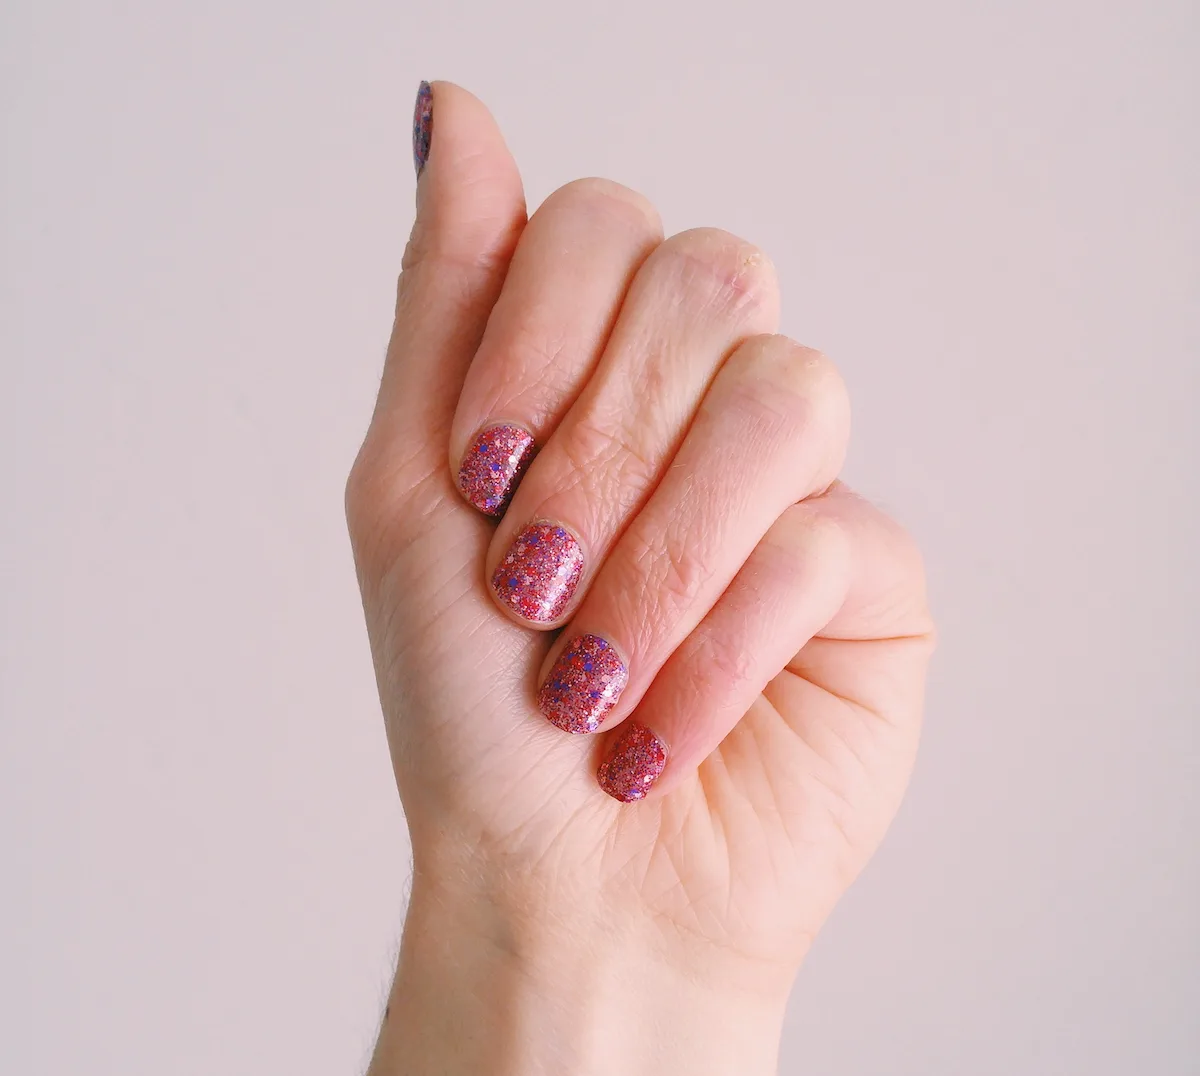 Woman's hand showing pink and purple glitter nails.